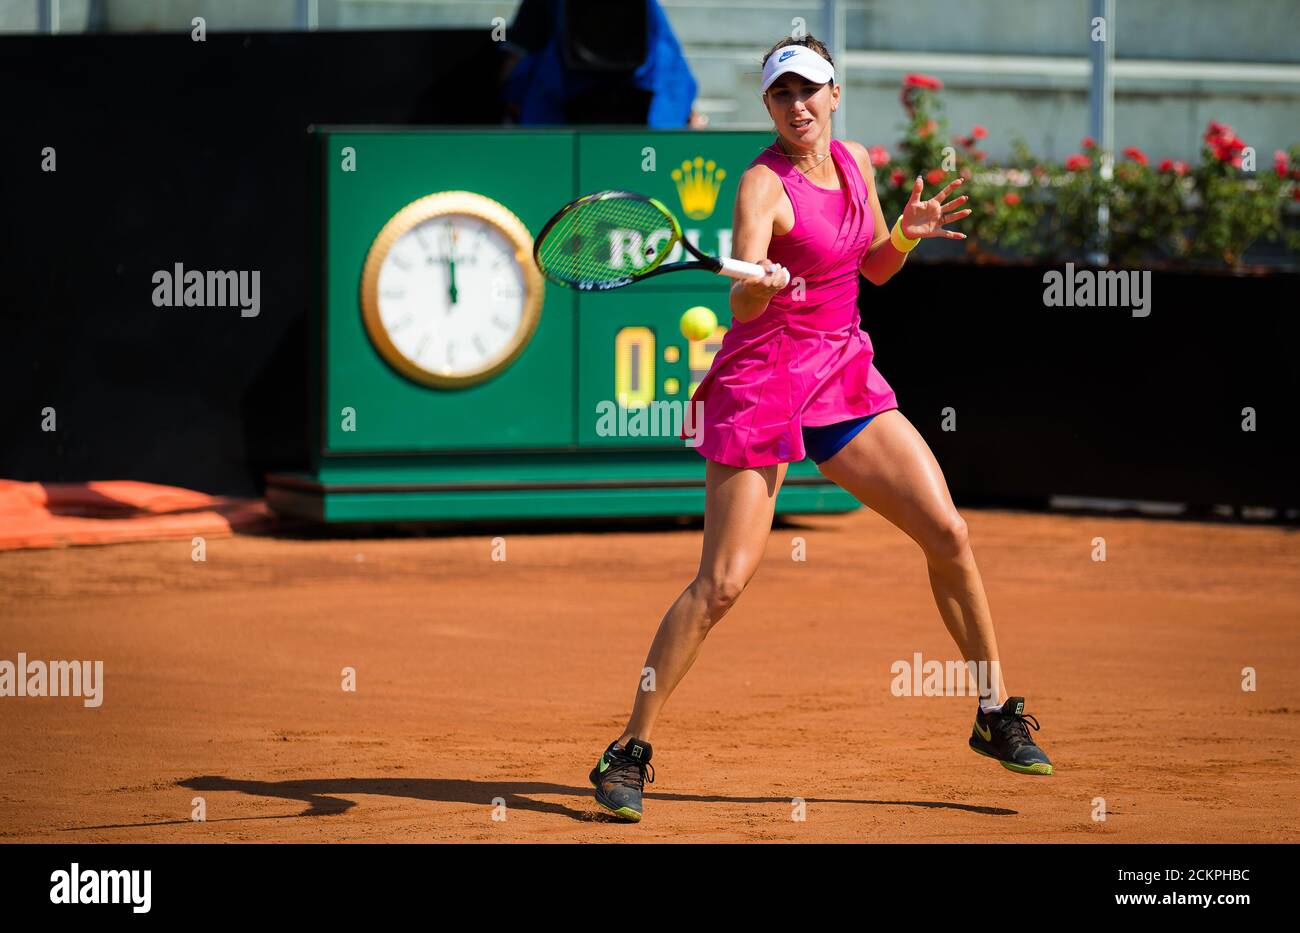 Rome, Italy. 16th Sep, 2020. Belinda Bencic of Switzerland in action during  her second round match at the 2020 Internazionali BNL d'Italia WTA Premier  5 tennis tournament on September 16, 2020 at